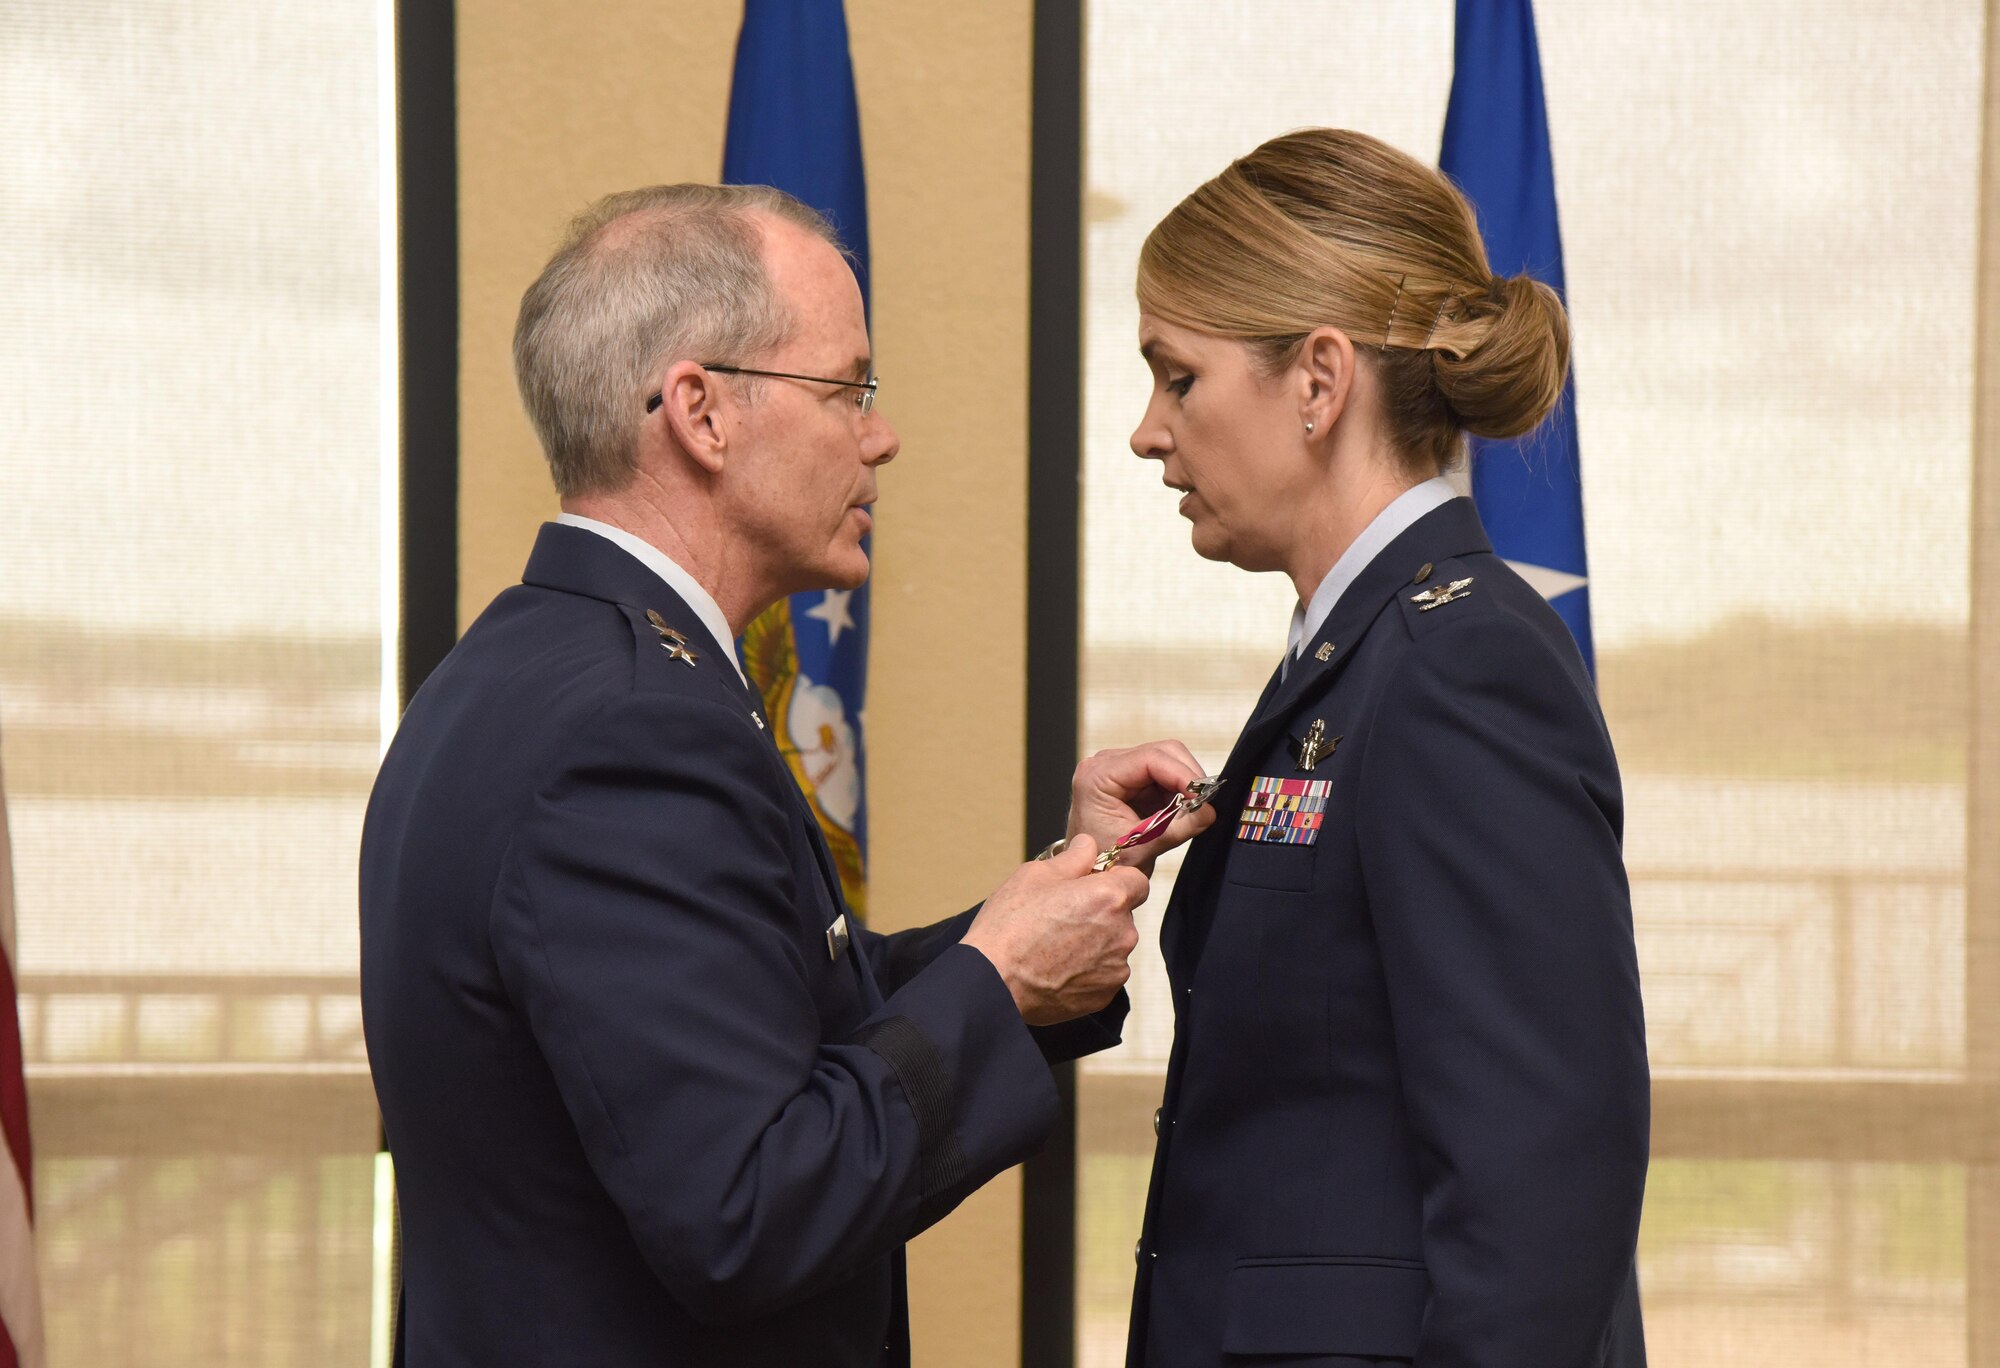 Maj. Gen. Bob LaBrutta, 2nd Air Force commander, presents the Legion of Merit medal to Col. Michele Edmondson, outgoing 81st Training Wing commander, during a change of command ceremony at the Bay Breeze Event Center June 2, 2017, on Keesler Air Force Base, Miss. The ceremony is a symbol of command being exchanged from one commander to the next by the handing-off of a ceremonial guidon. Edmondson is now assigned to be the executive officer to the vice chief of staff of the Air Force at the Pentagon in Washington D.C. (U.S. Air Force photo by Kemberly Groue) 